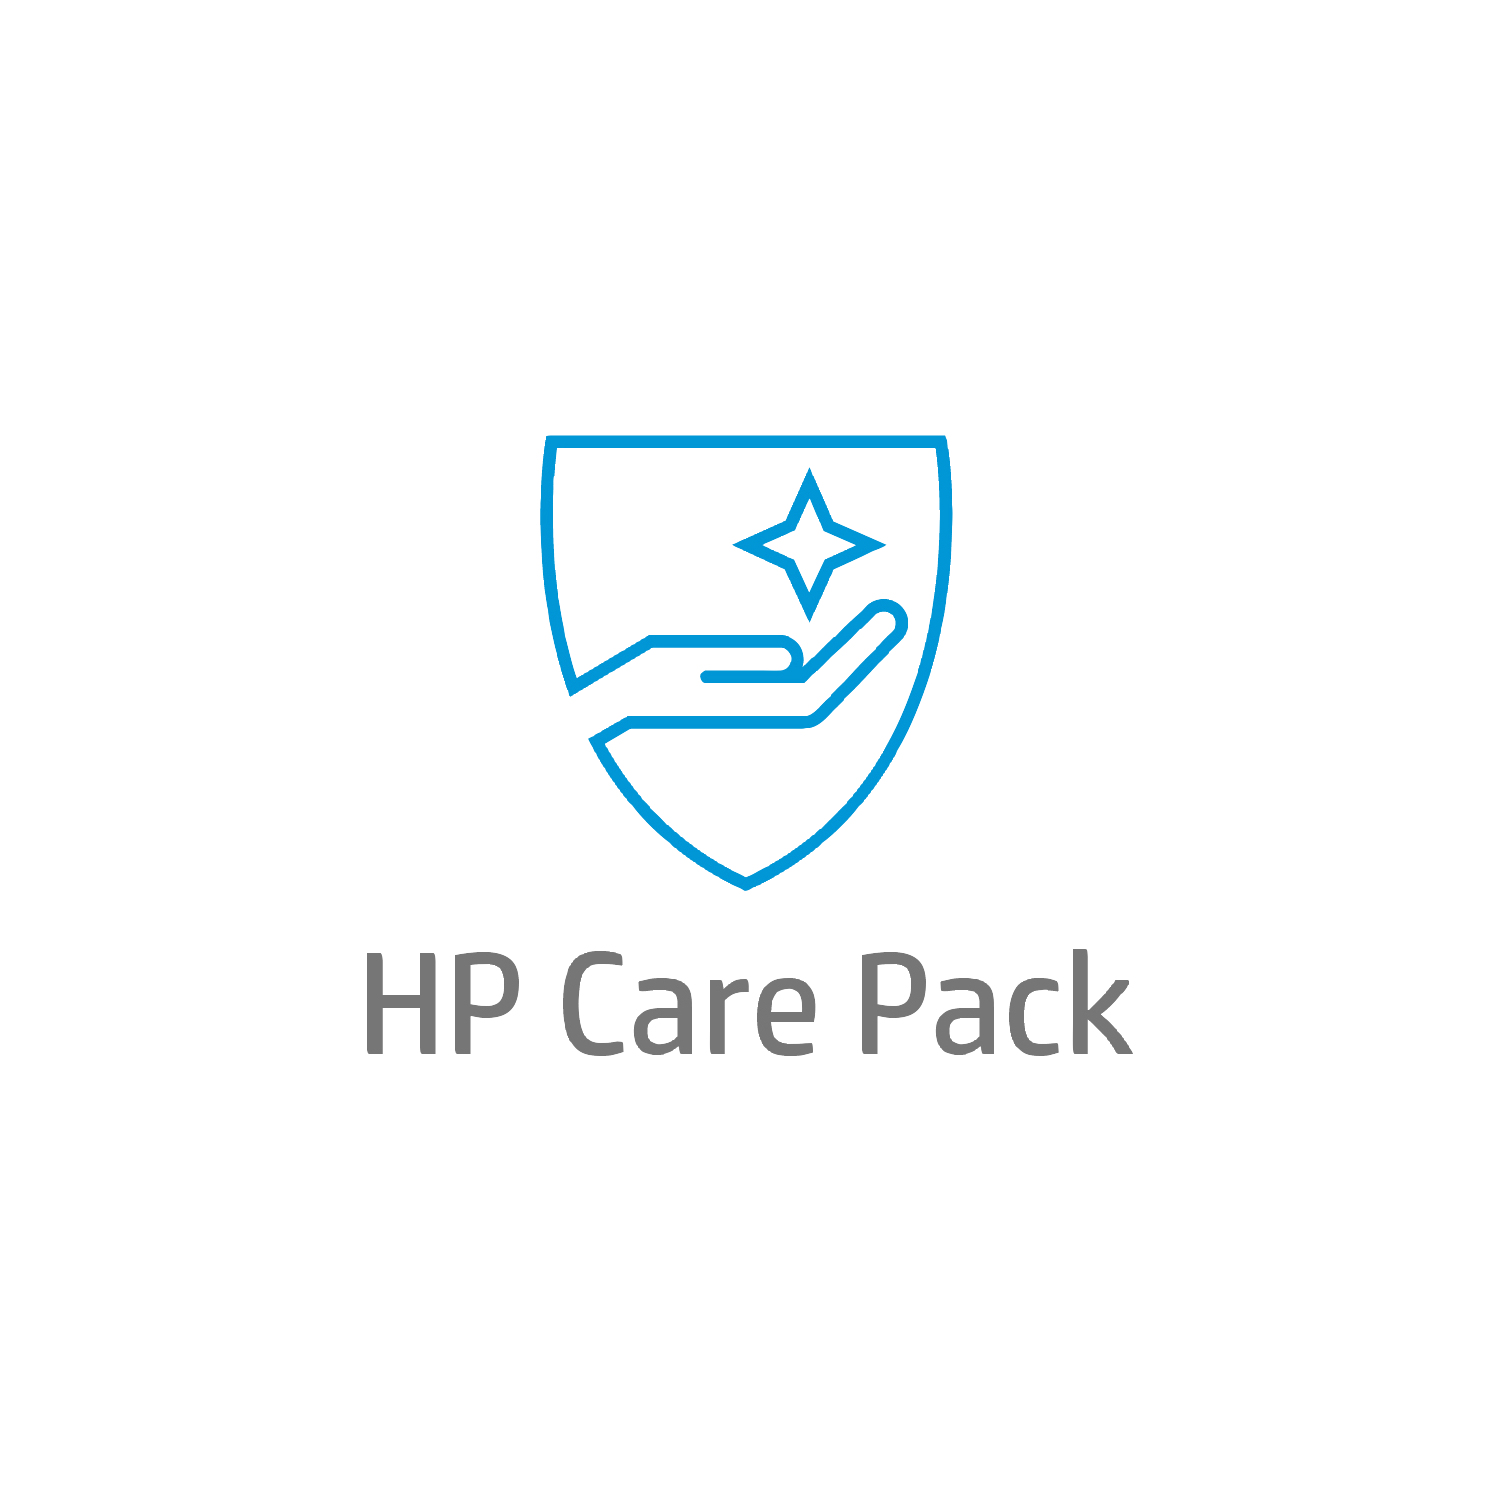 HP 5y 9x5 Workplace 1-99 License Support REQUIRED for each software lic. purchased.